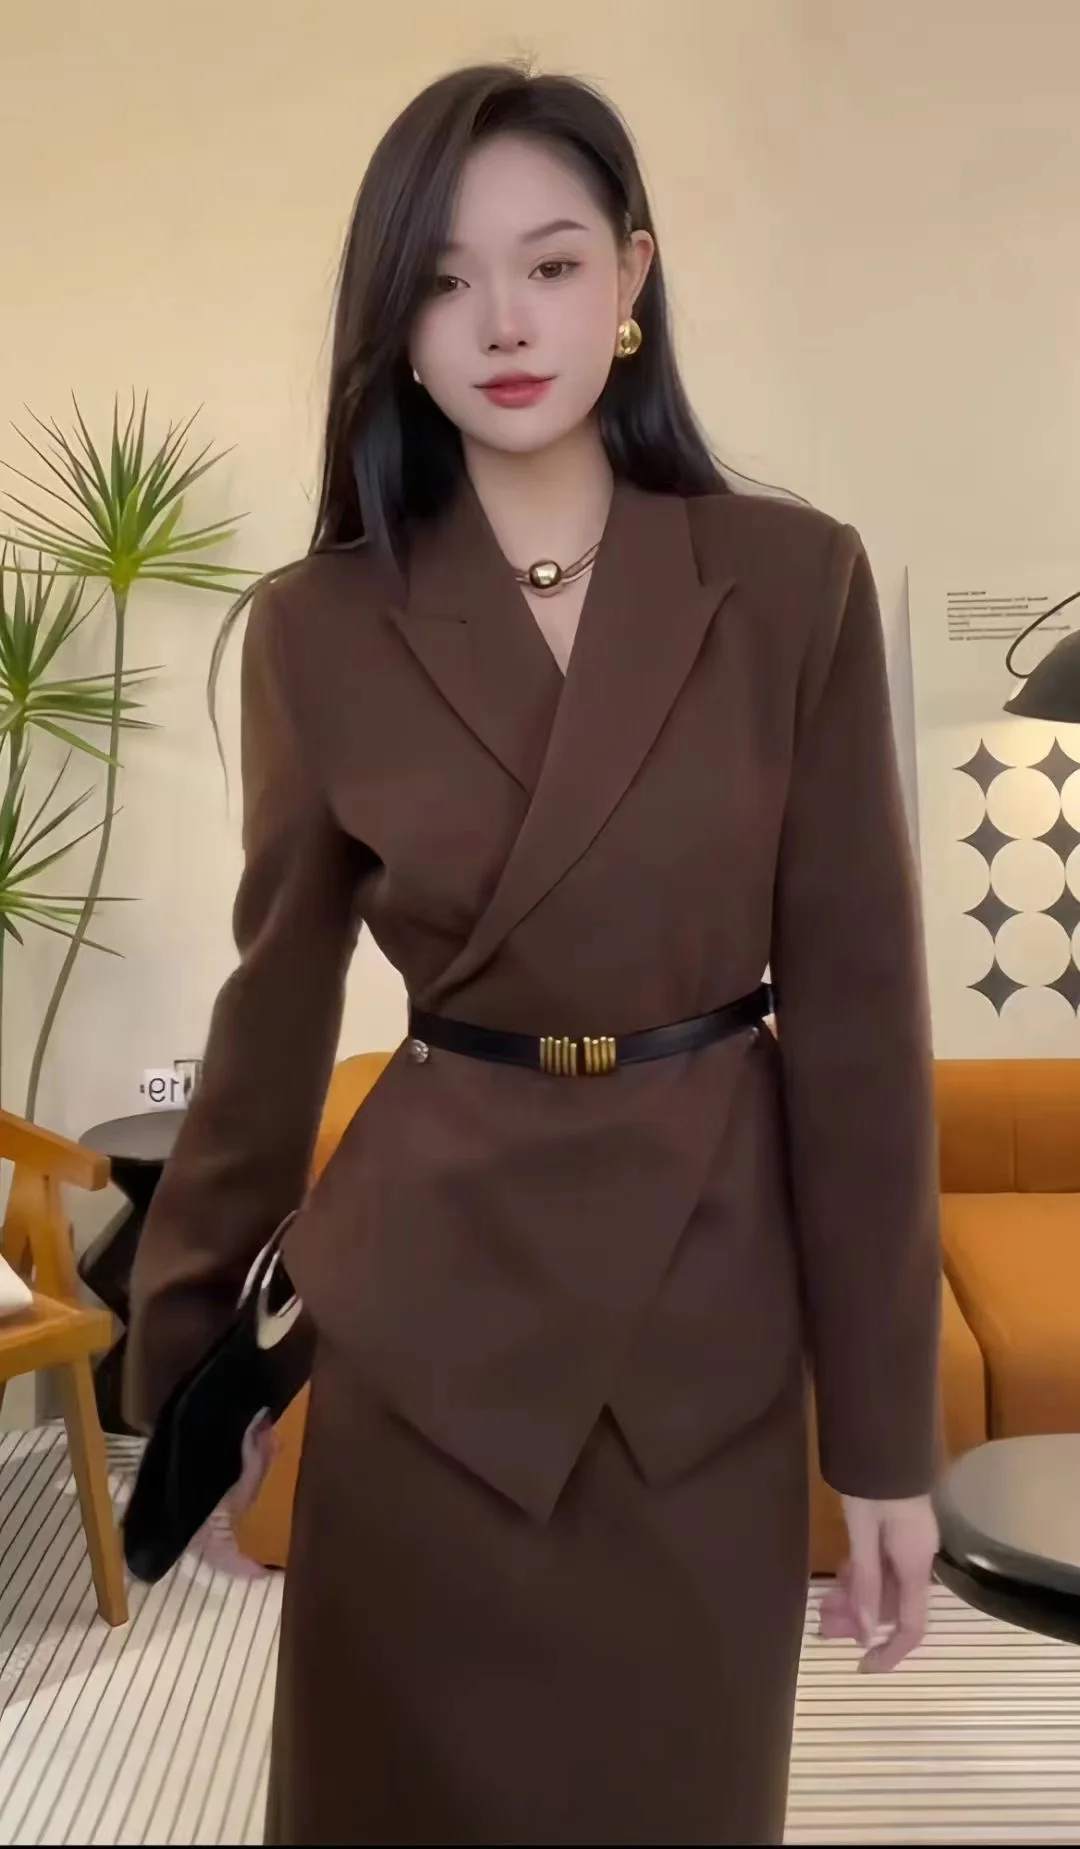 

UNXX Professional Suit High-End Elegance Goddess Style Blazer Jacket and High Waisted Pencil Skirt Two-Piece Set for Women Girl